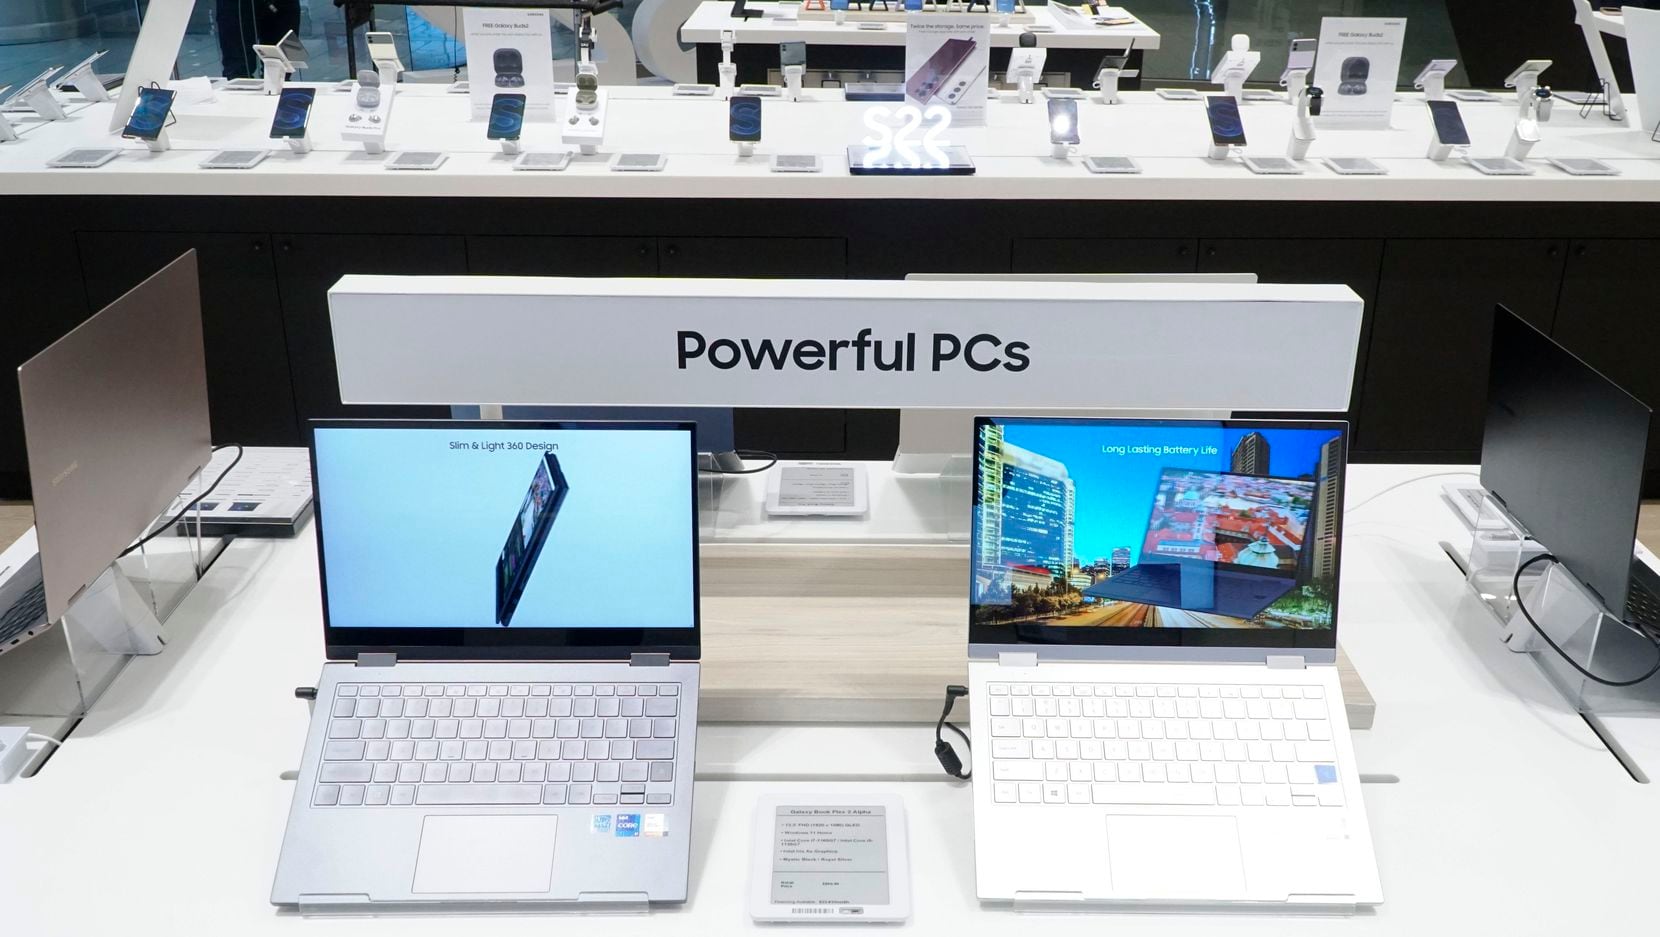 The new Samsung store in Frisco's Stonebriar Centre also sells laptops and accessories.

